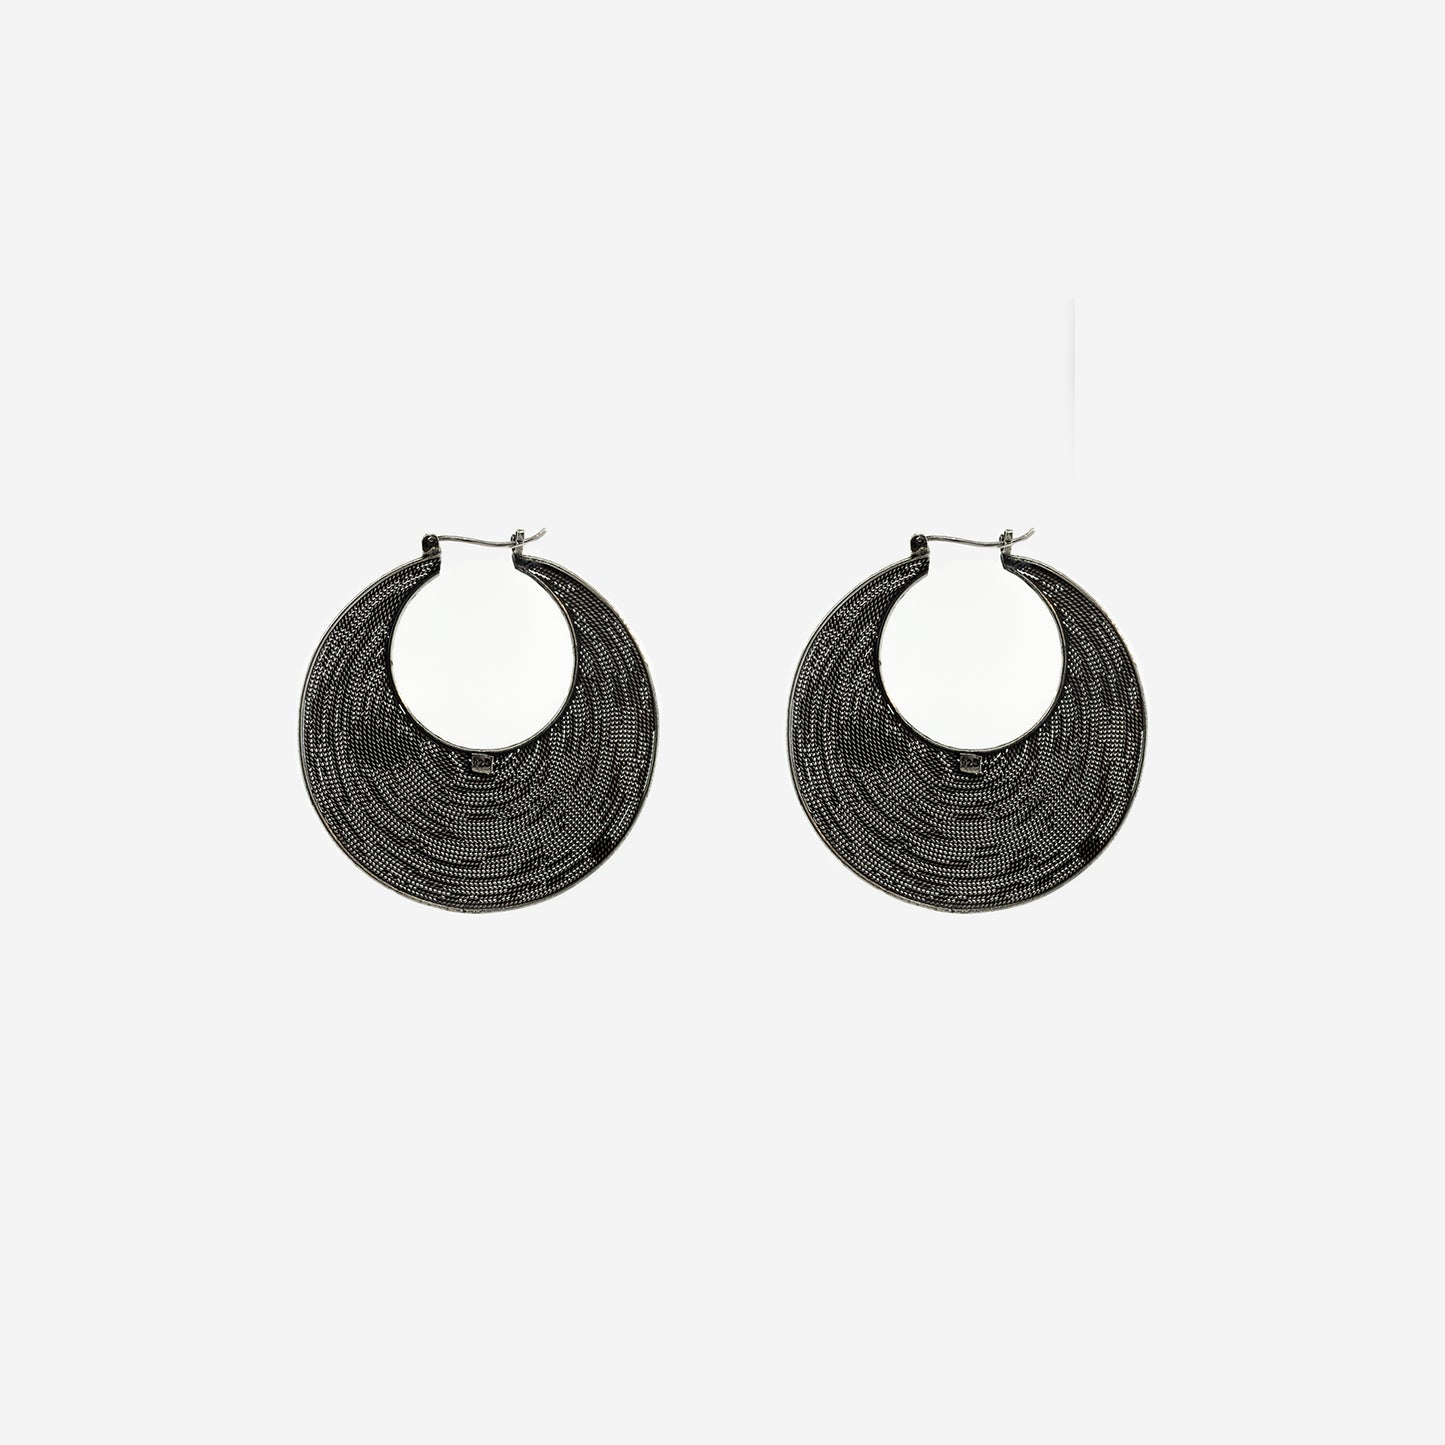 A pair of Super Silver Bali Crescent Mesh Hinged Hoop Earrings with intricate silver work, inspired by Bali style hoops, set against a clean white background.